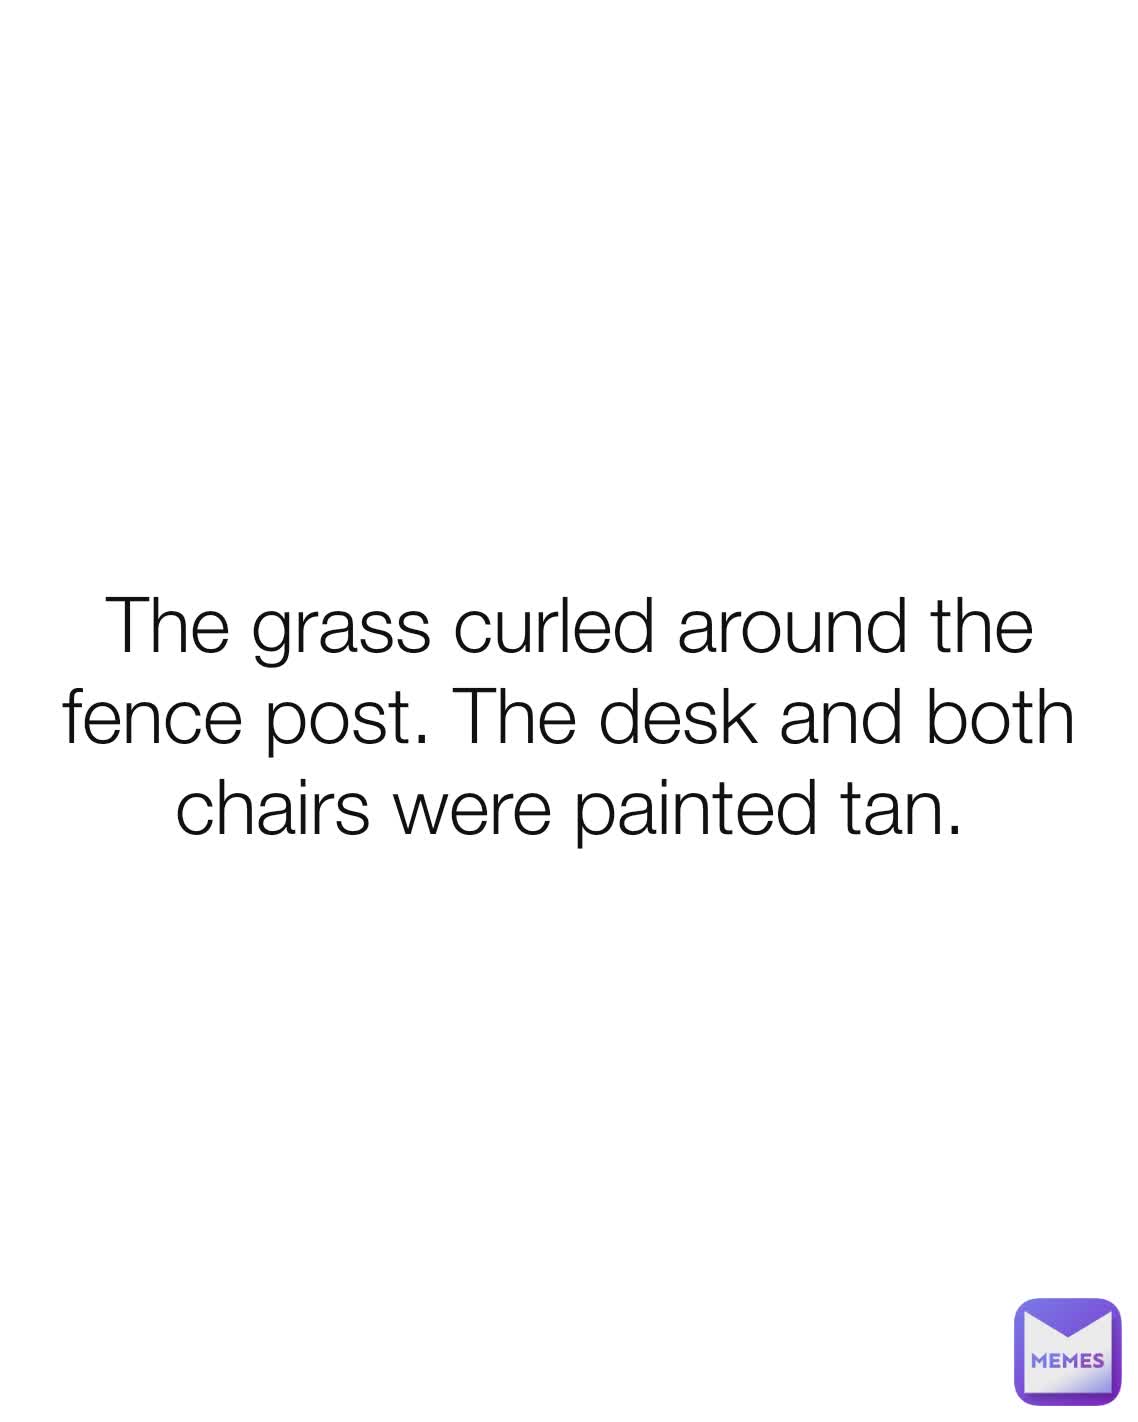 The grass curled around the fence post. The desk and both chairs were painted tan.